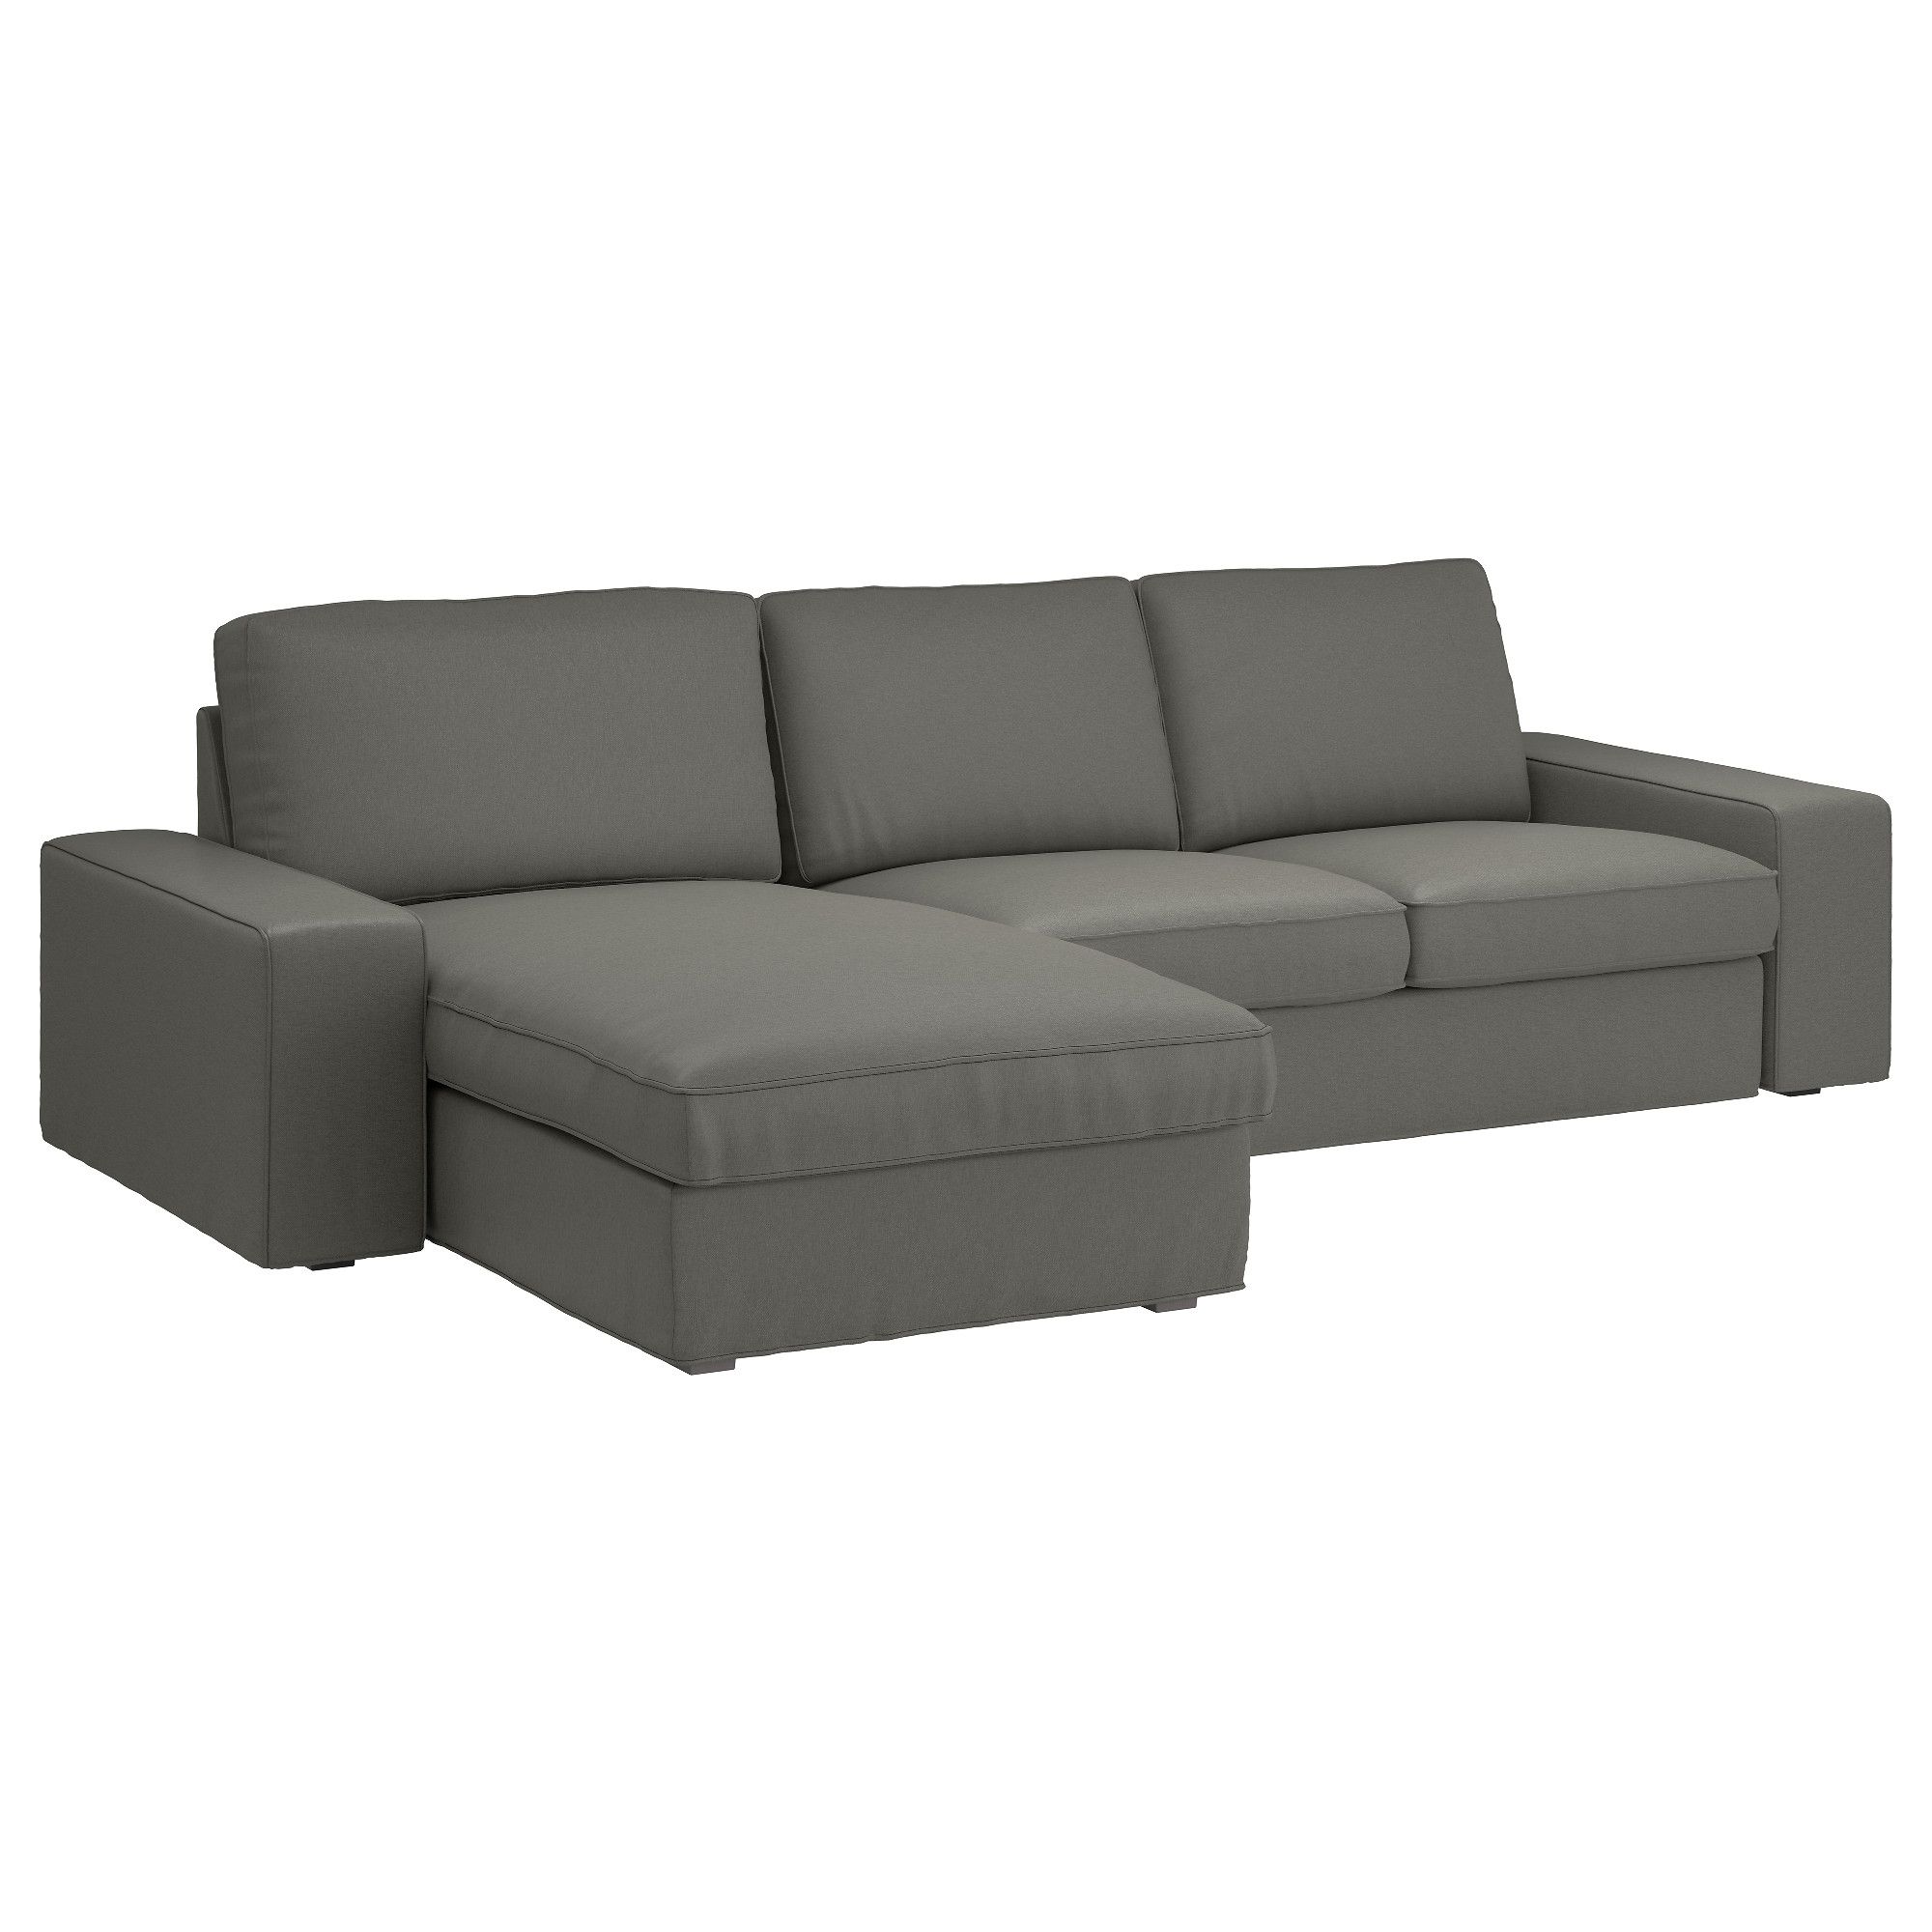 Kivik Sofa – With Chaise/hillared Beige – Ikea Inside Favorite Ikea Chaise Sofas (View 4 of 15)